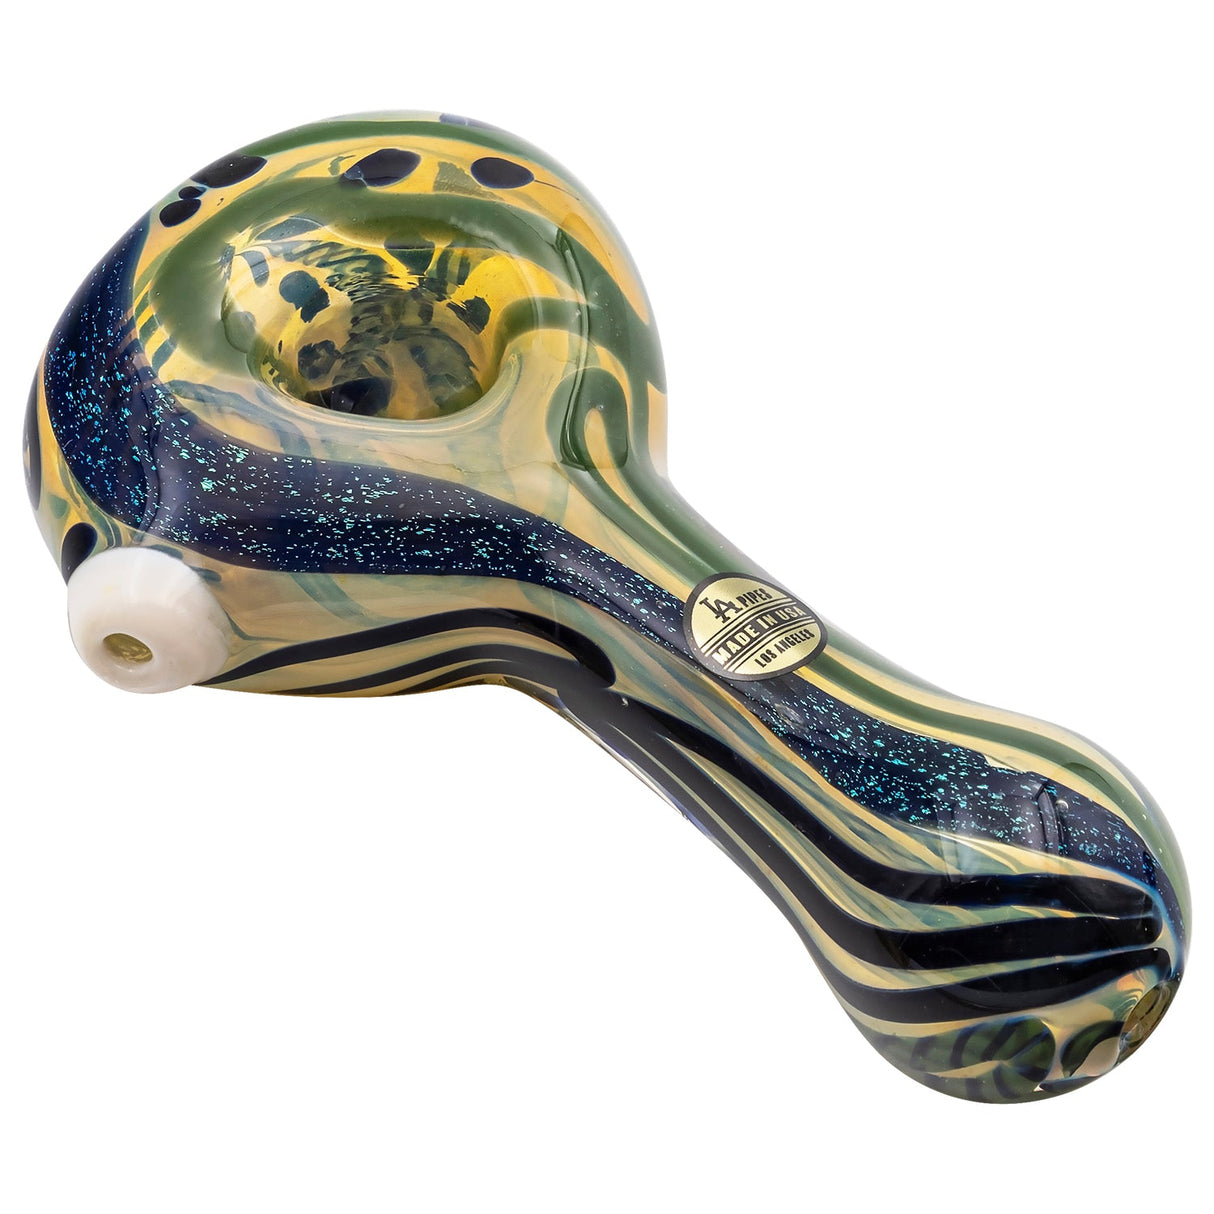 LA Pipes "Pancake" Dichroic Spoon Pipe with Color-Changing Fumed Glass, Side View